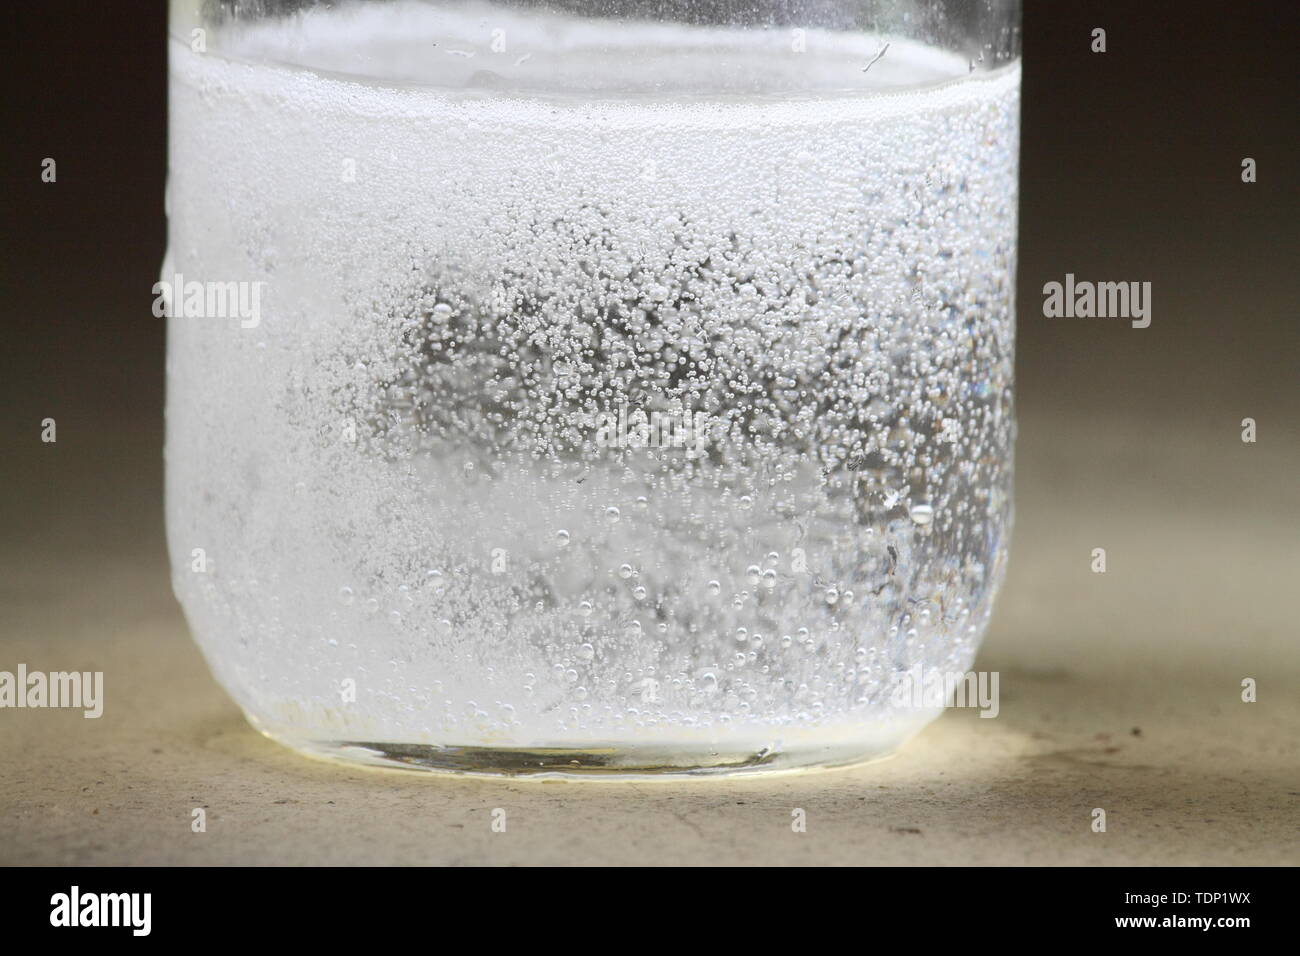 Closeup of a vinegar and baking soda reaction happening in the bottom of a glass jar; violent reaction with many bubbles Stock Photo